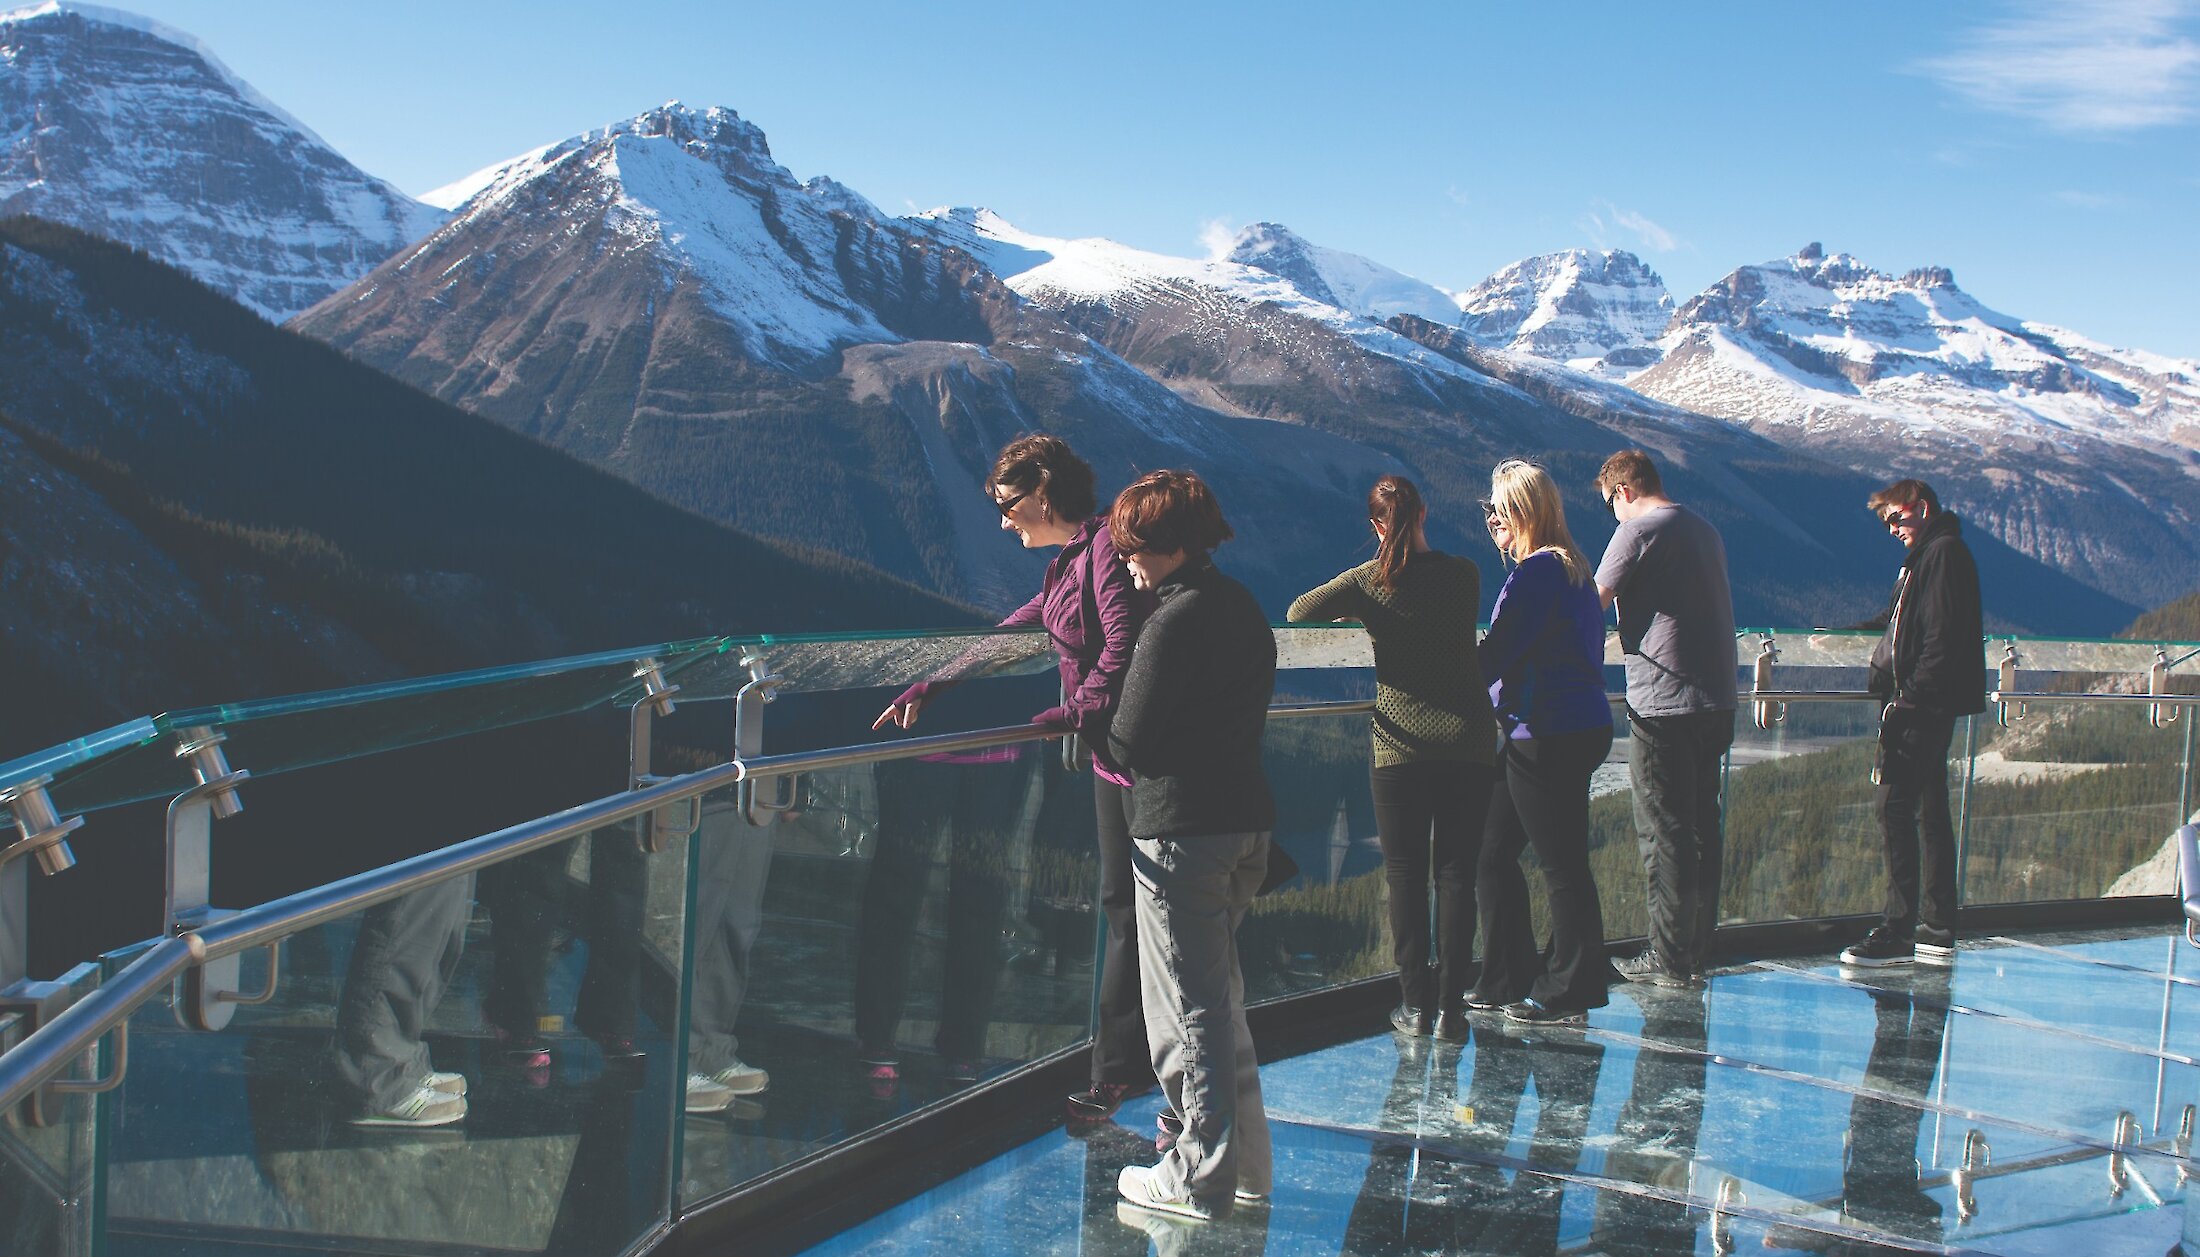 Group admiring the views from the Skywalk at Columbia Icefield